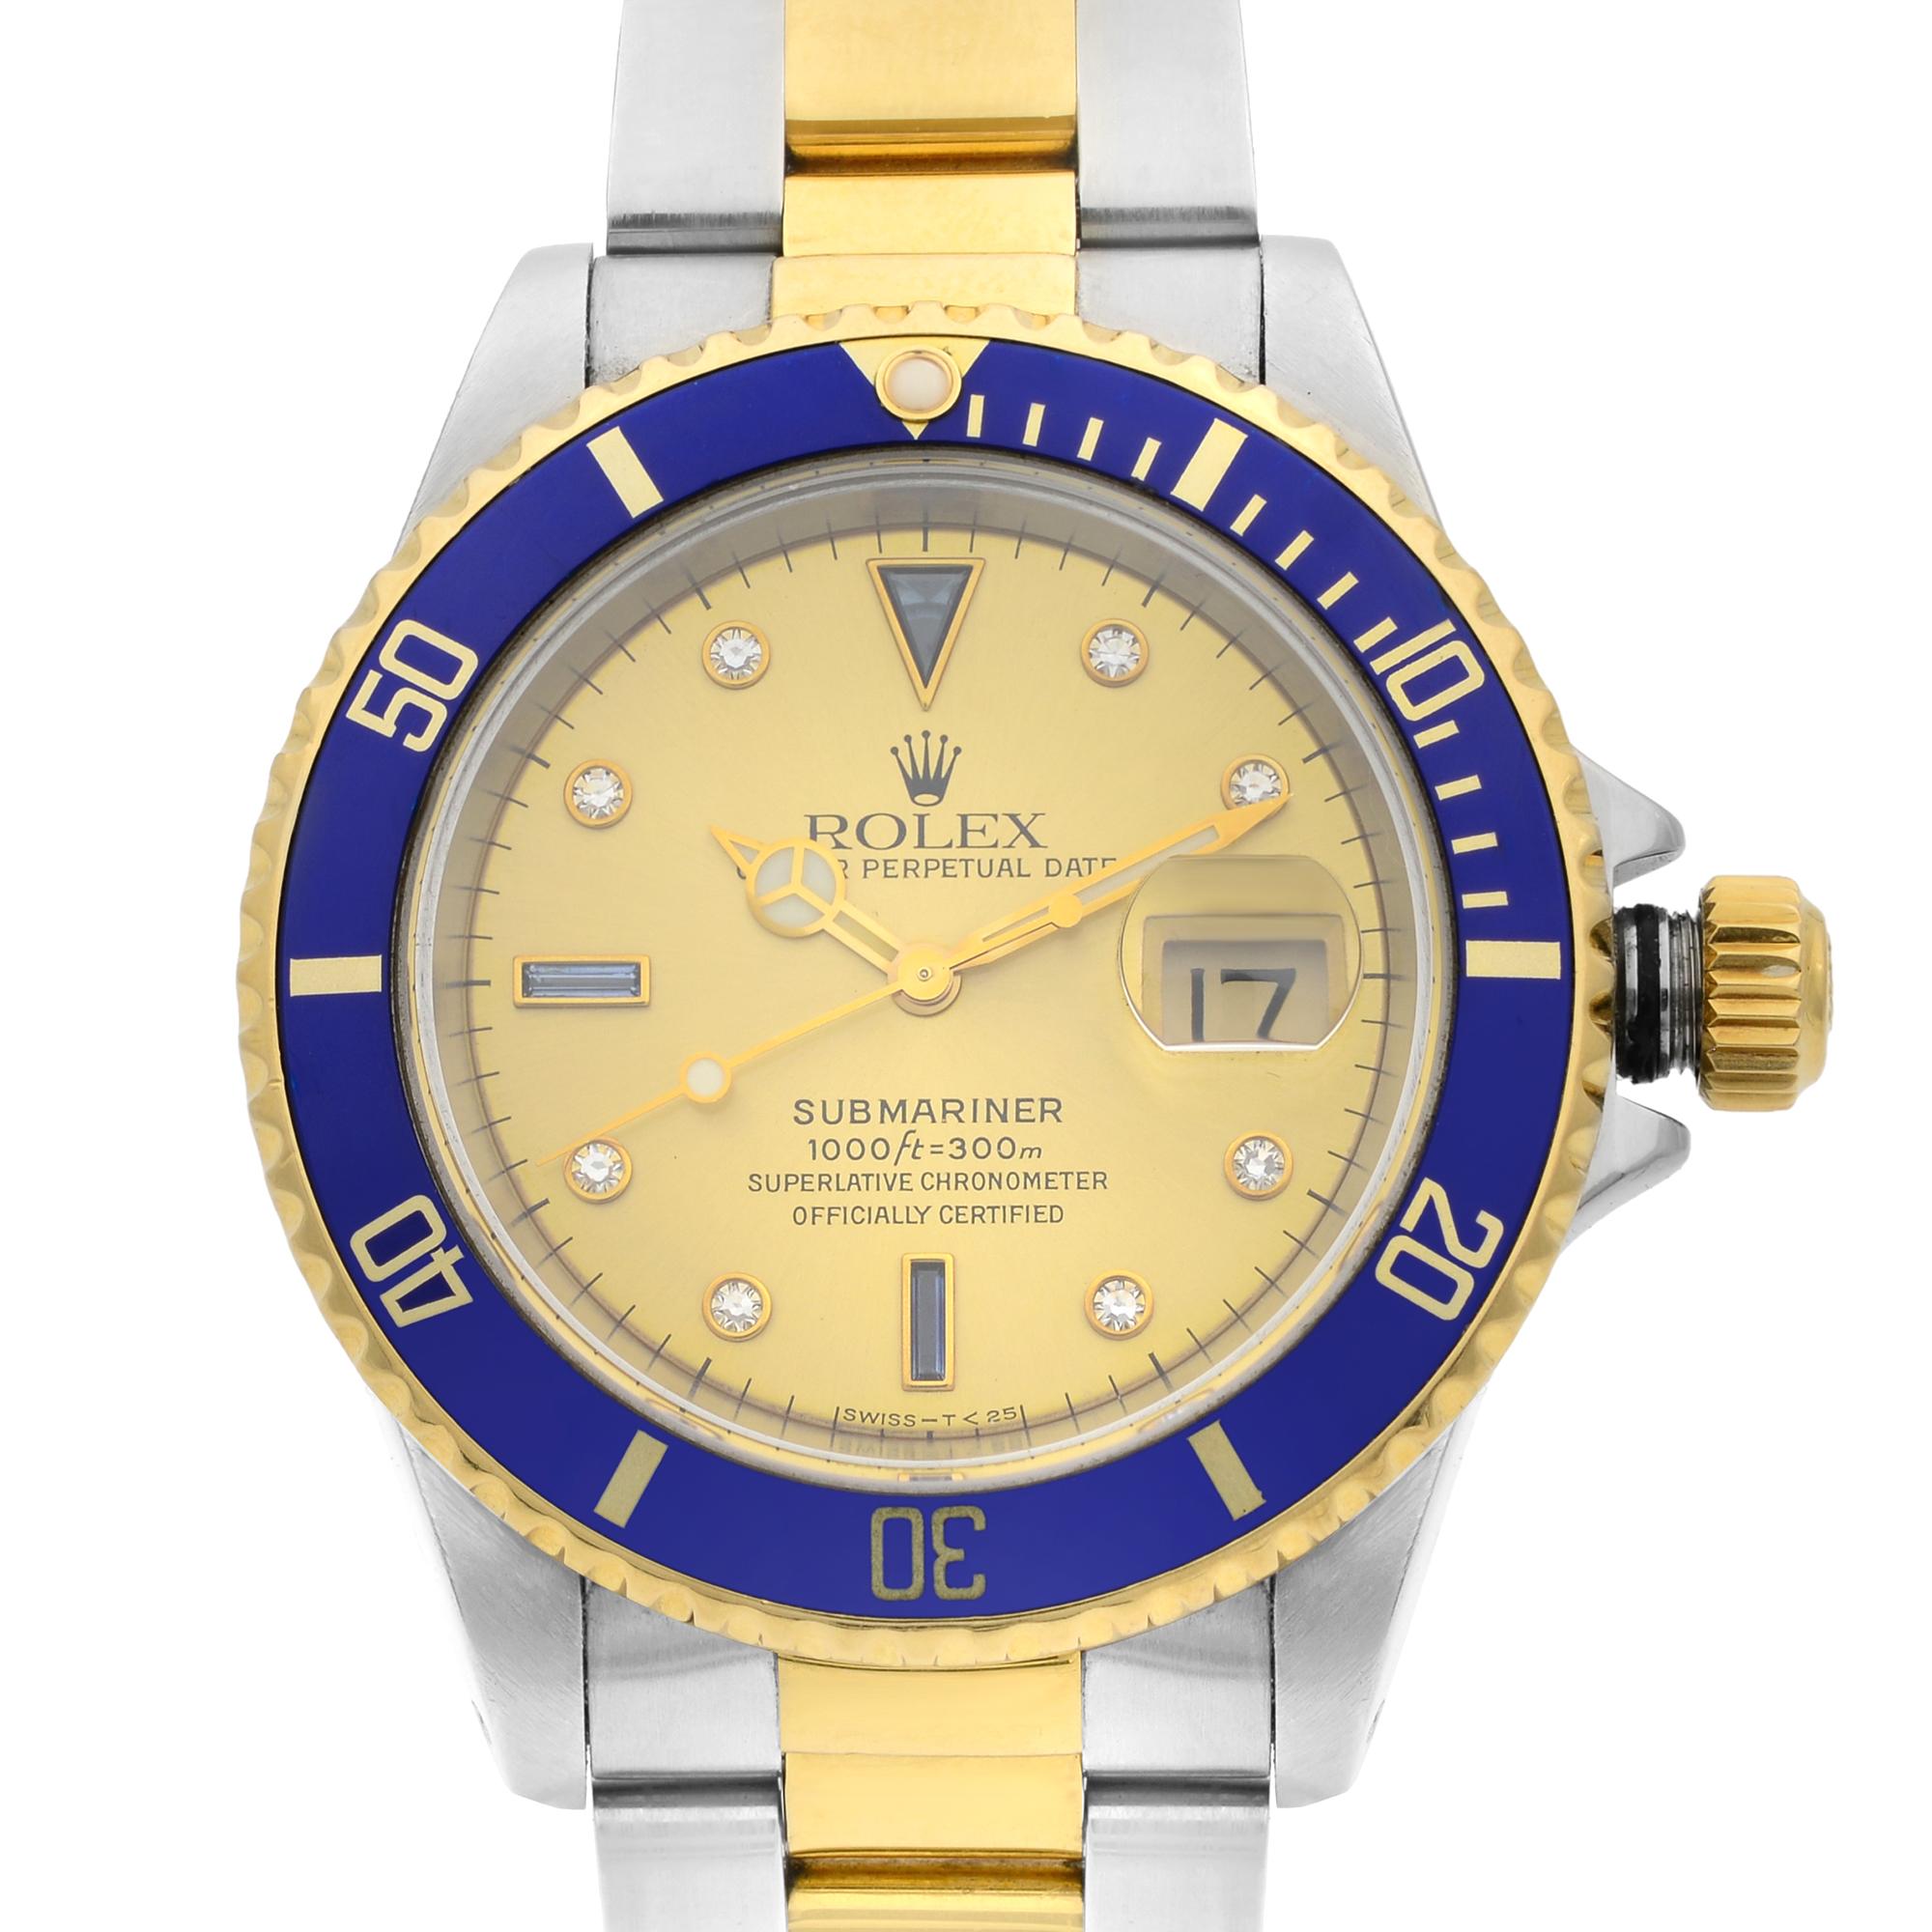 This pre-owned Rolex Submariner 16613 is a beautiful men's timepiece that is powered by mechanical (automatic) movement which is cased in a stainless steel case. It has a round shape face, date indicator dial and has hand sticks & dots style